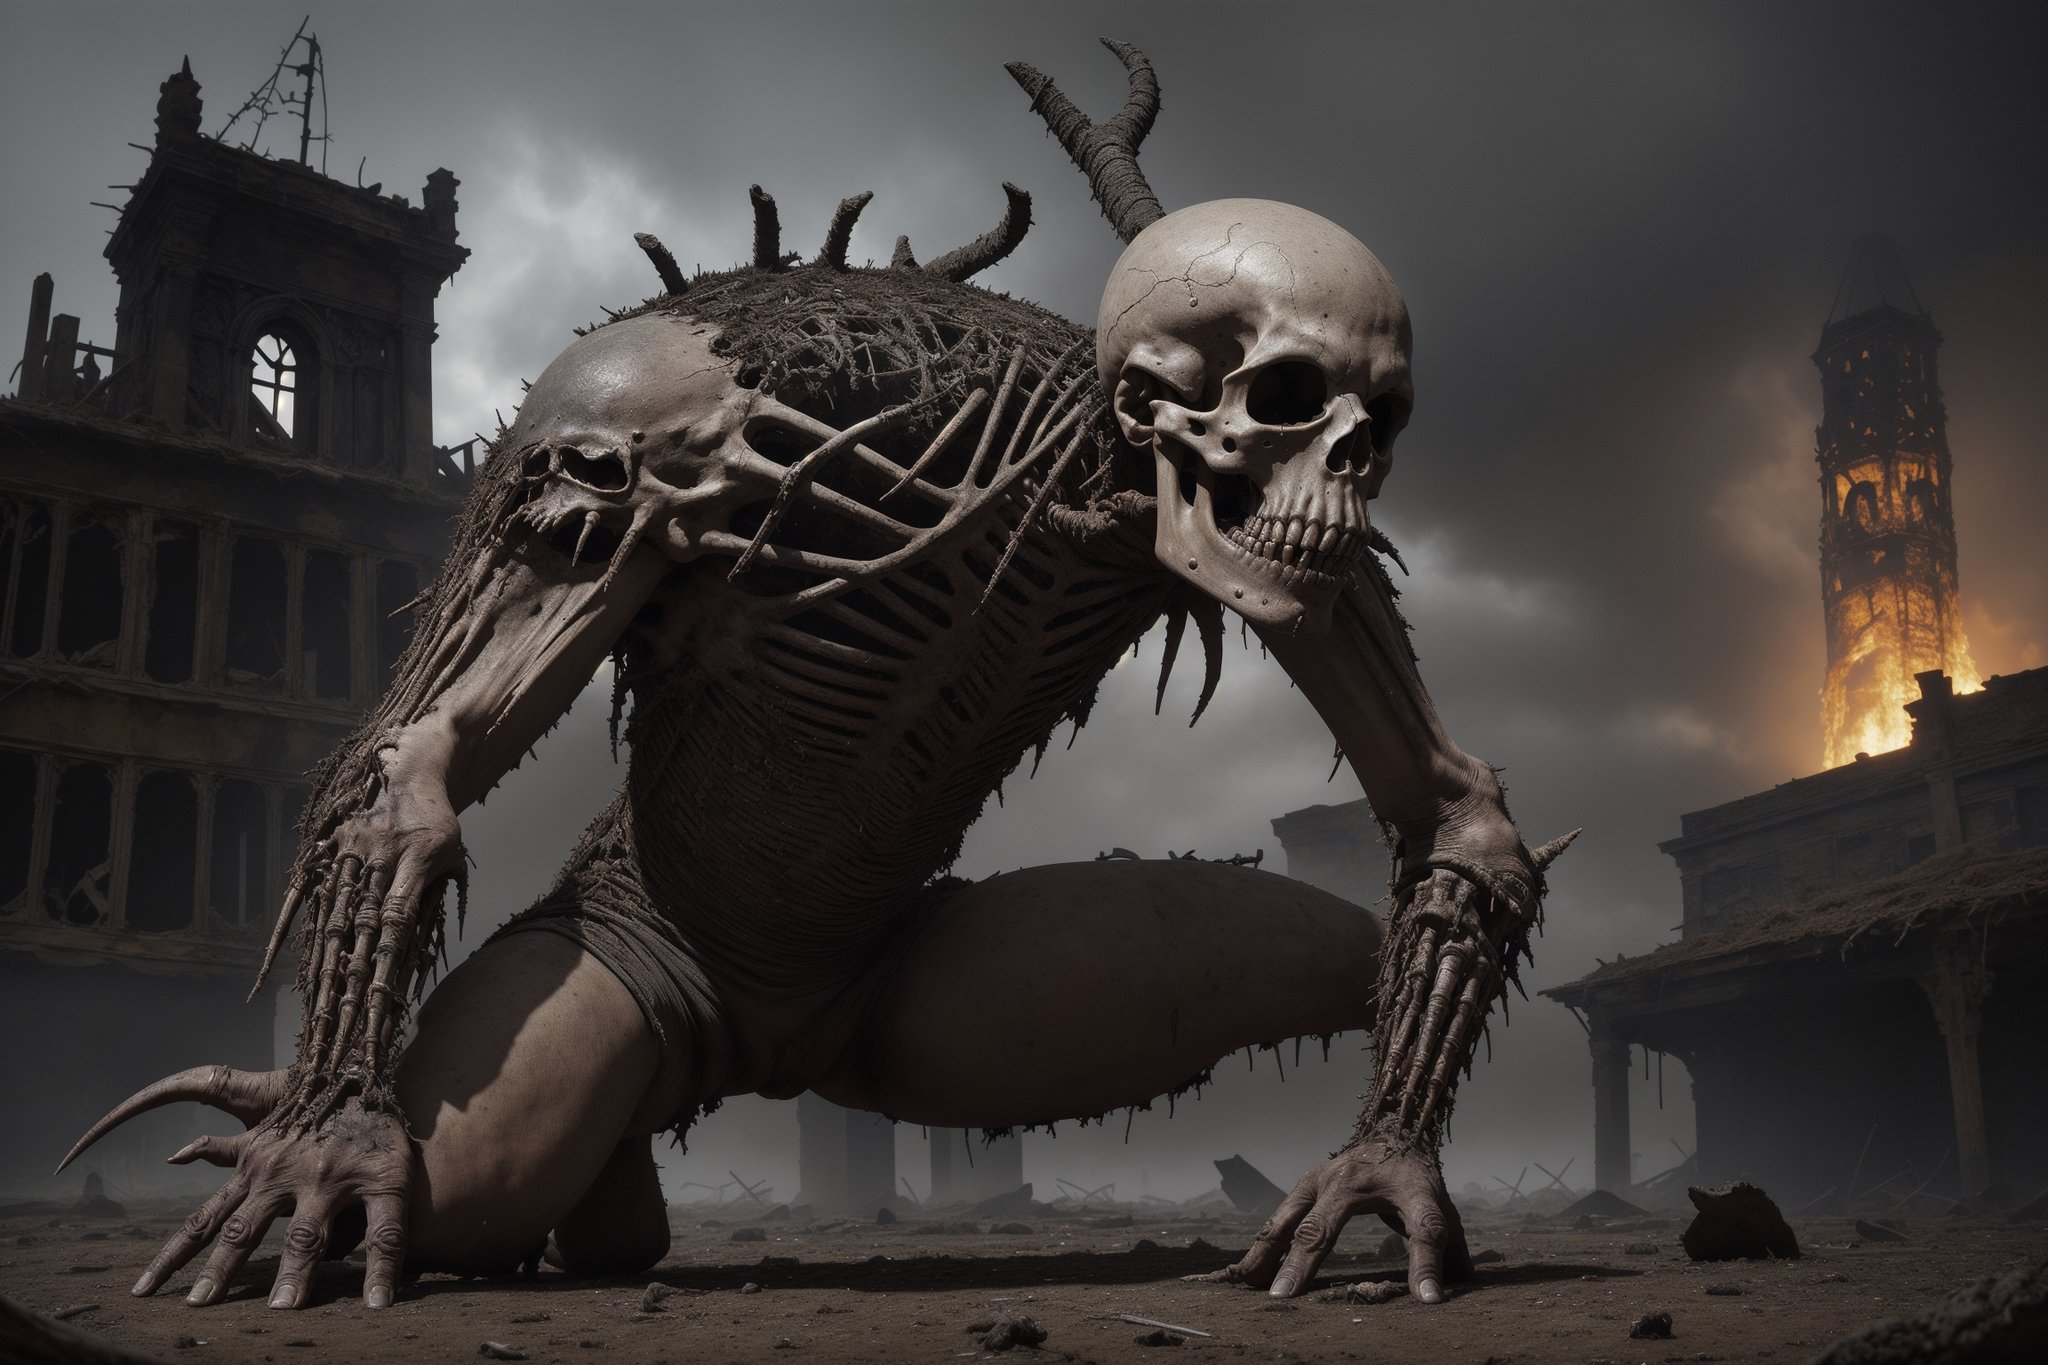 Ultra high resolution image of a skeletal warrior,  dry leathery skin hanging from its face in torn patches,  one eye still clearly visible in its socket,  wearing ornate rune encrusted black rusty damaged armour an axe in his hand,  kneeling on the ground. Dark gloomy old building in the background blood on the ground. All in the style of H. R. Giger Aliens.,
